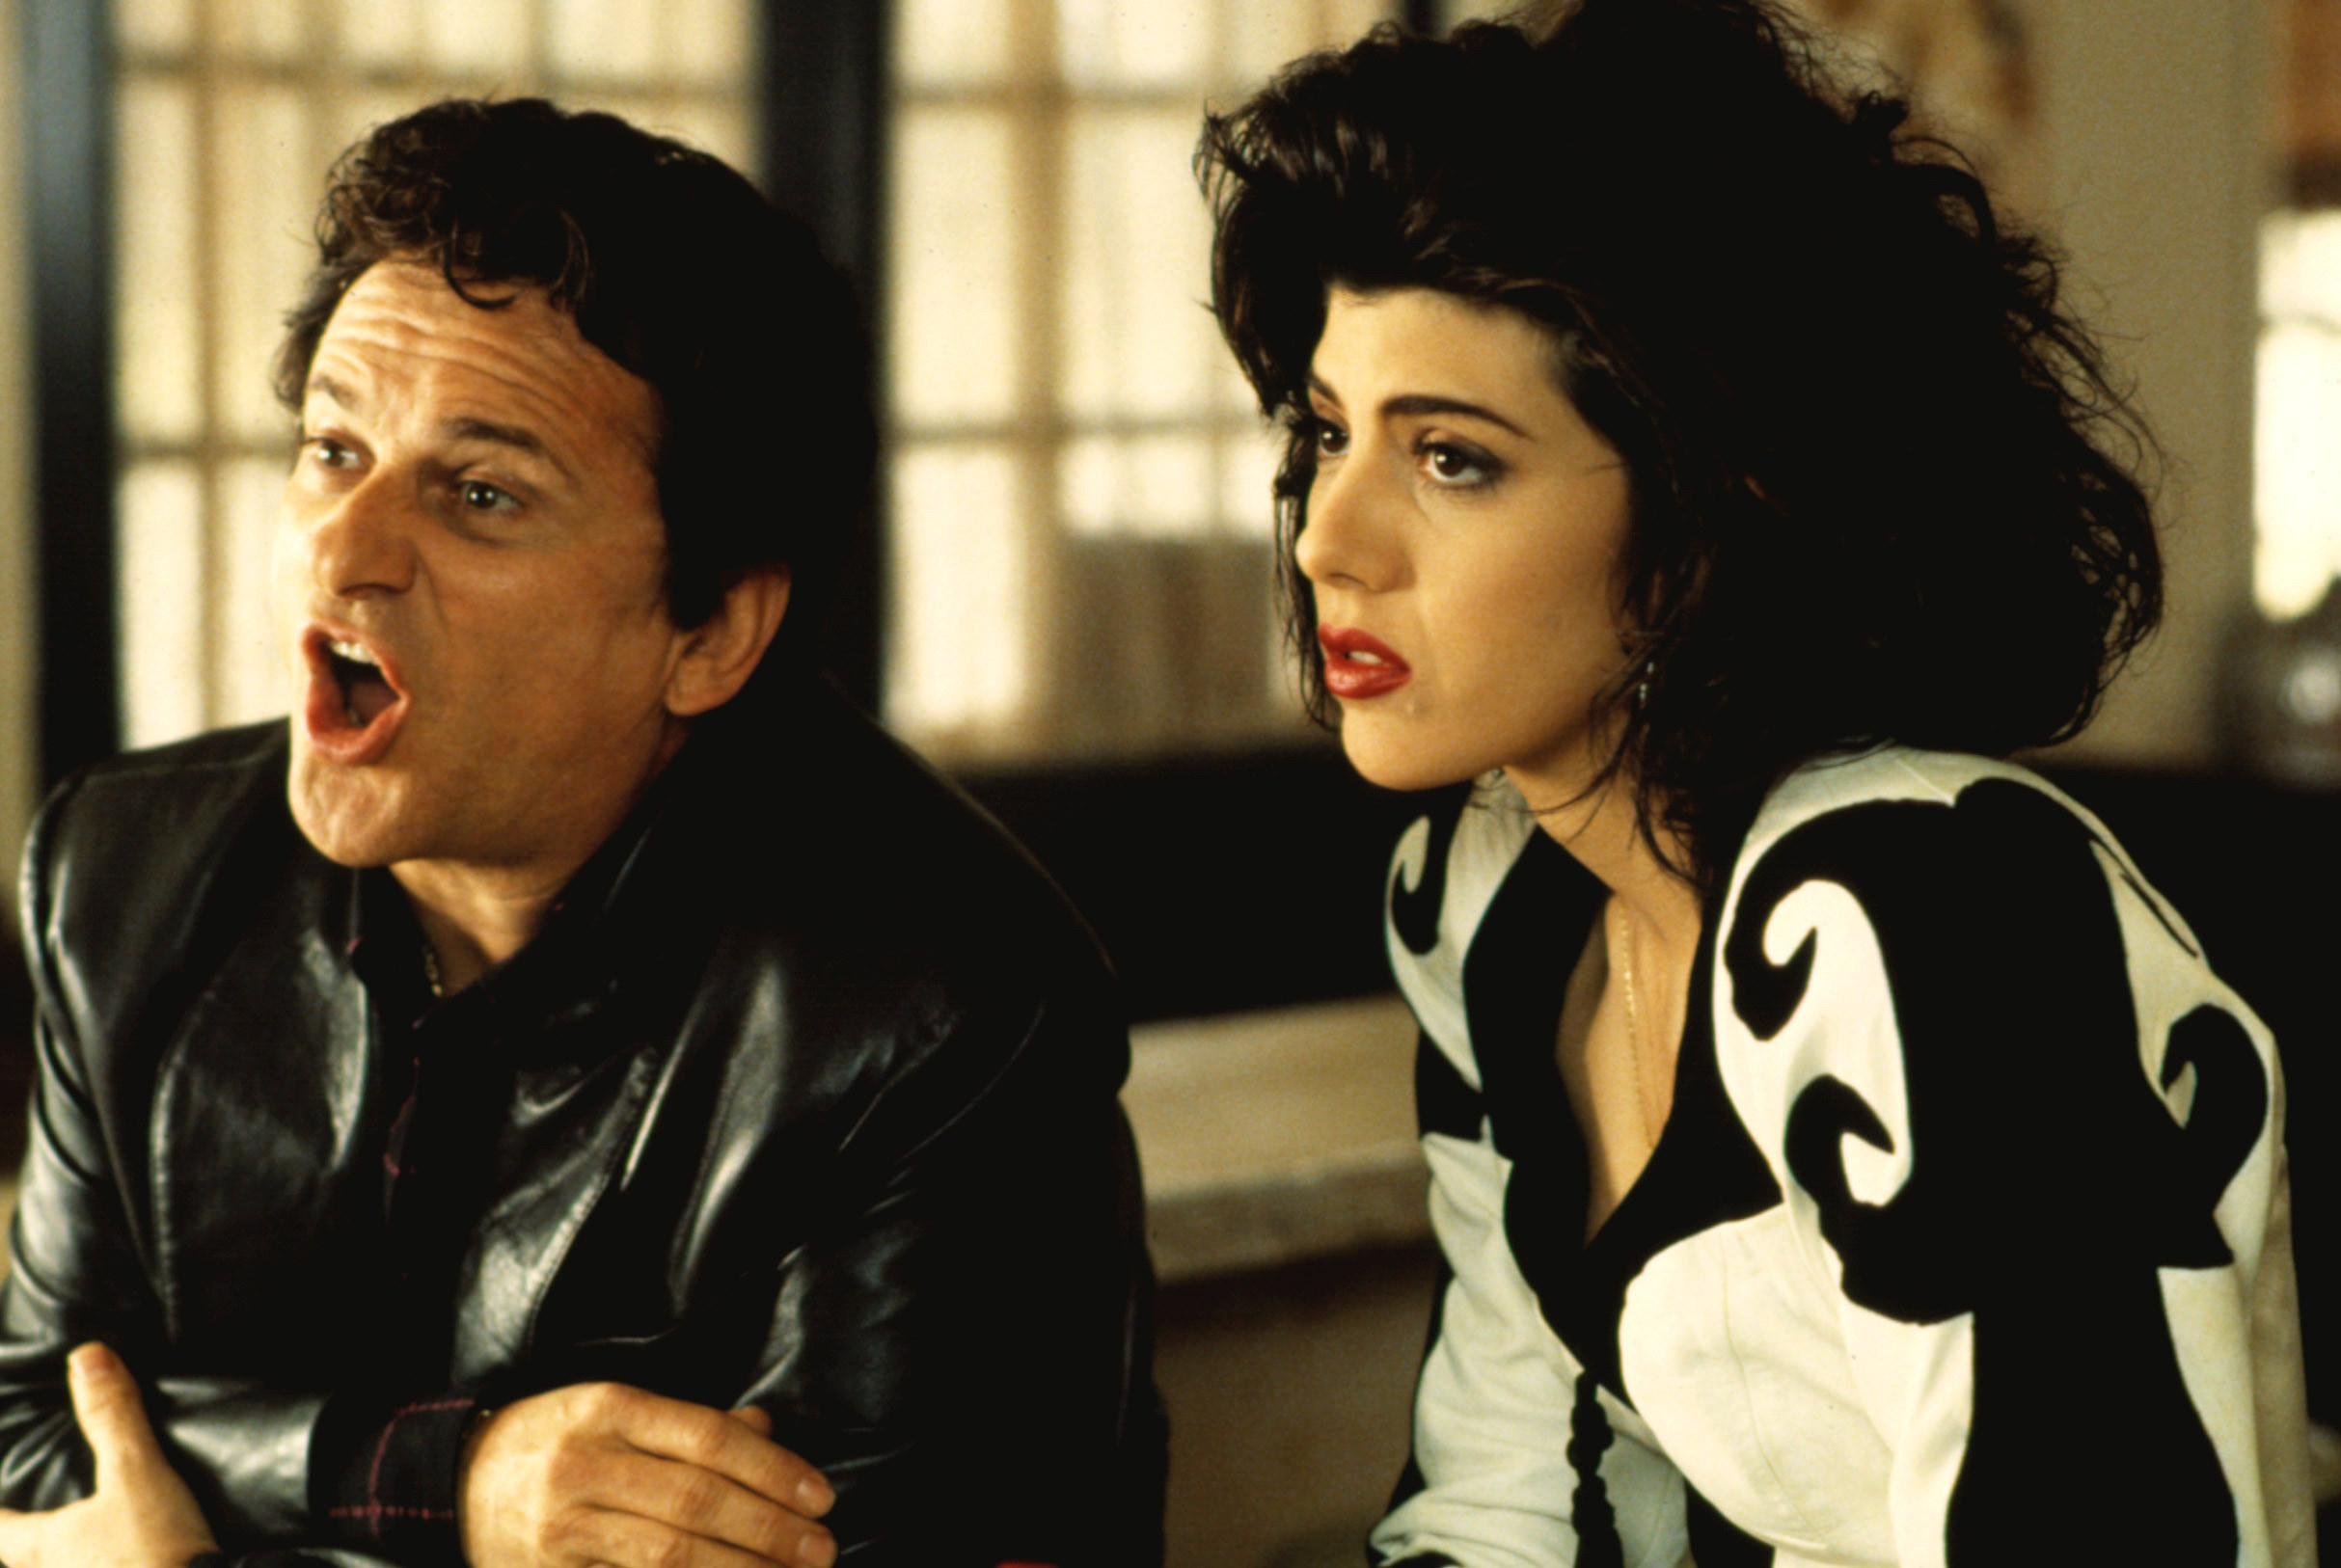 Joe Pesci as Vinny and Marisa Tomei as Mona Lisa are pictured during a scene in a diner for &quot;My Cousin Vinny&quot;